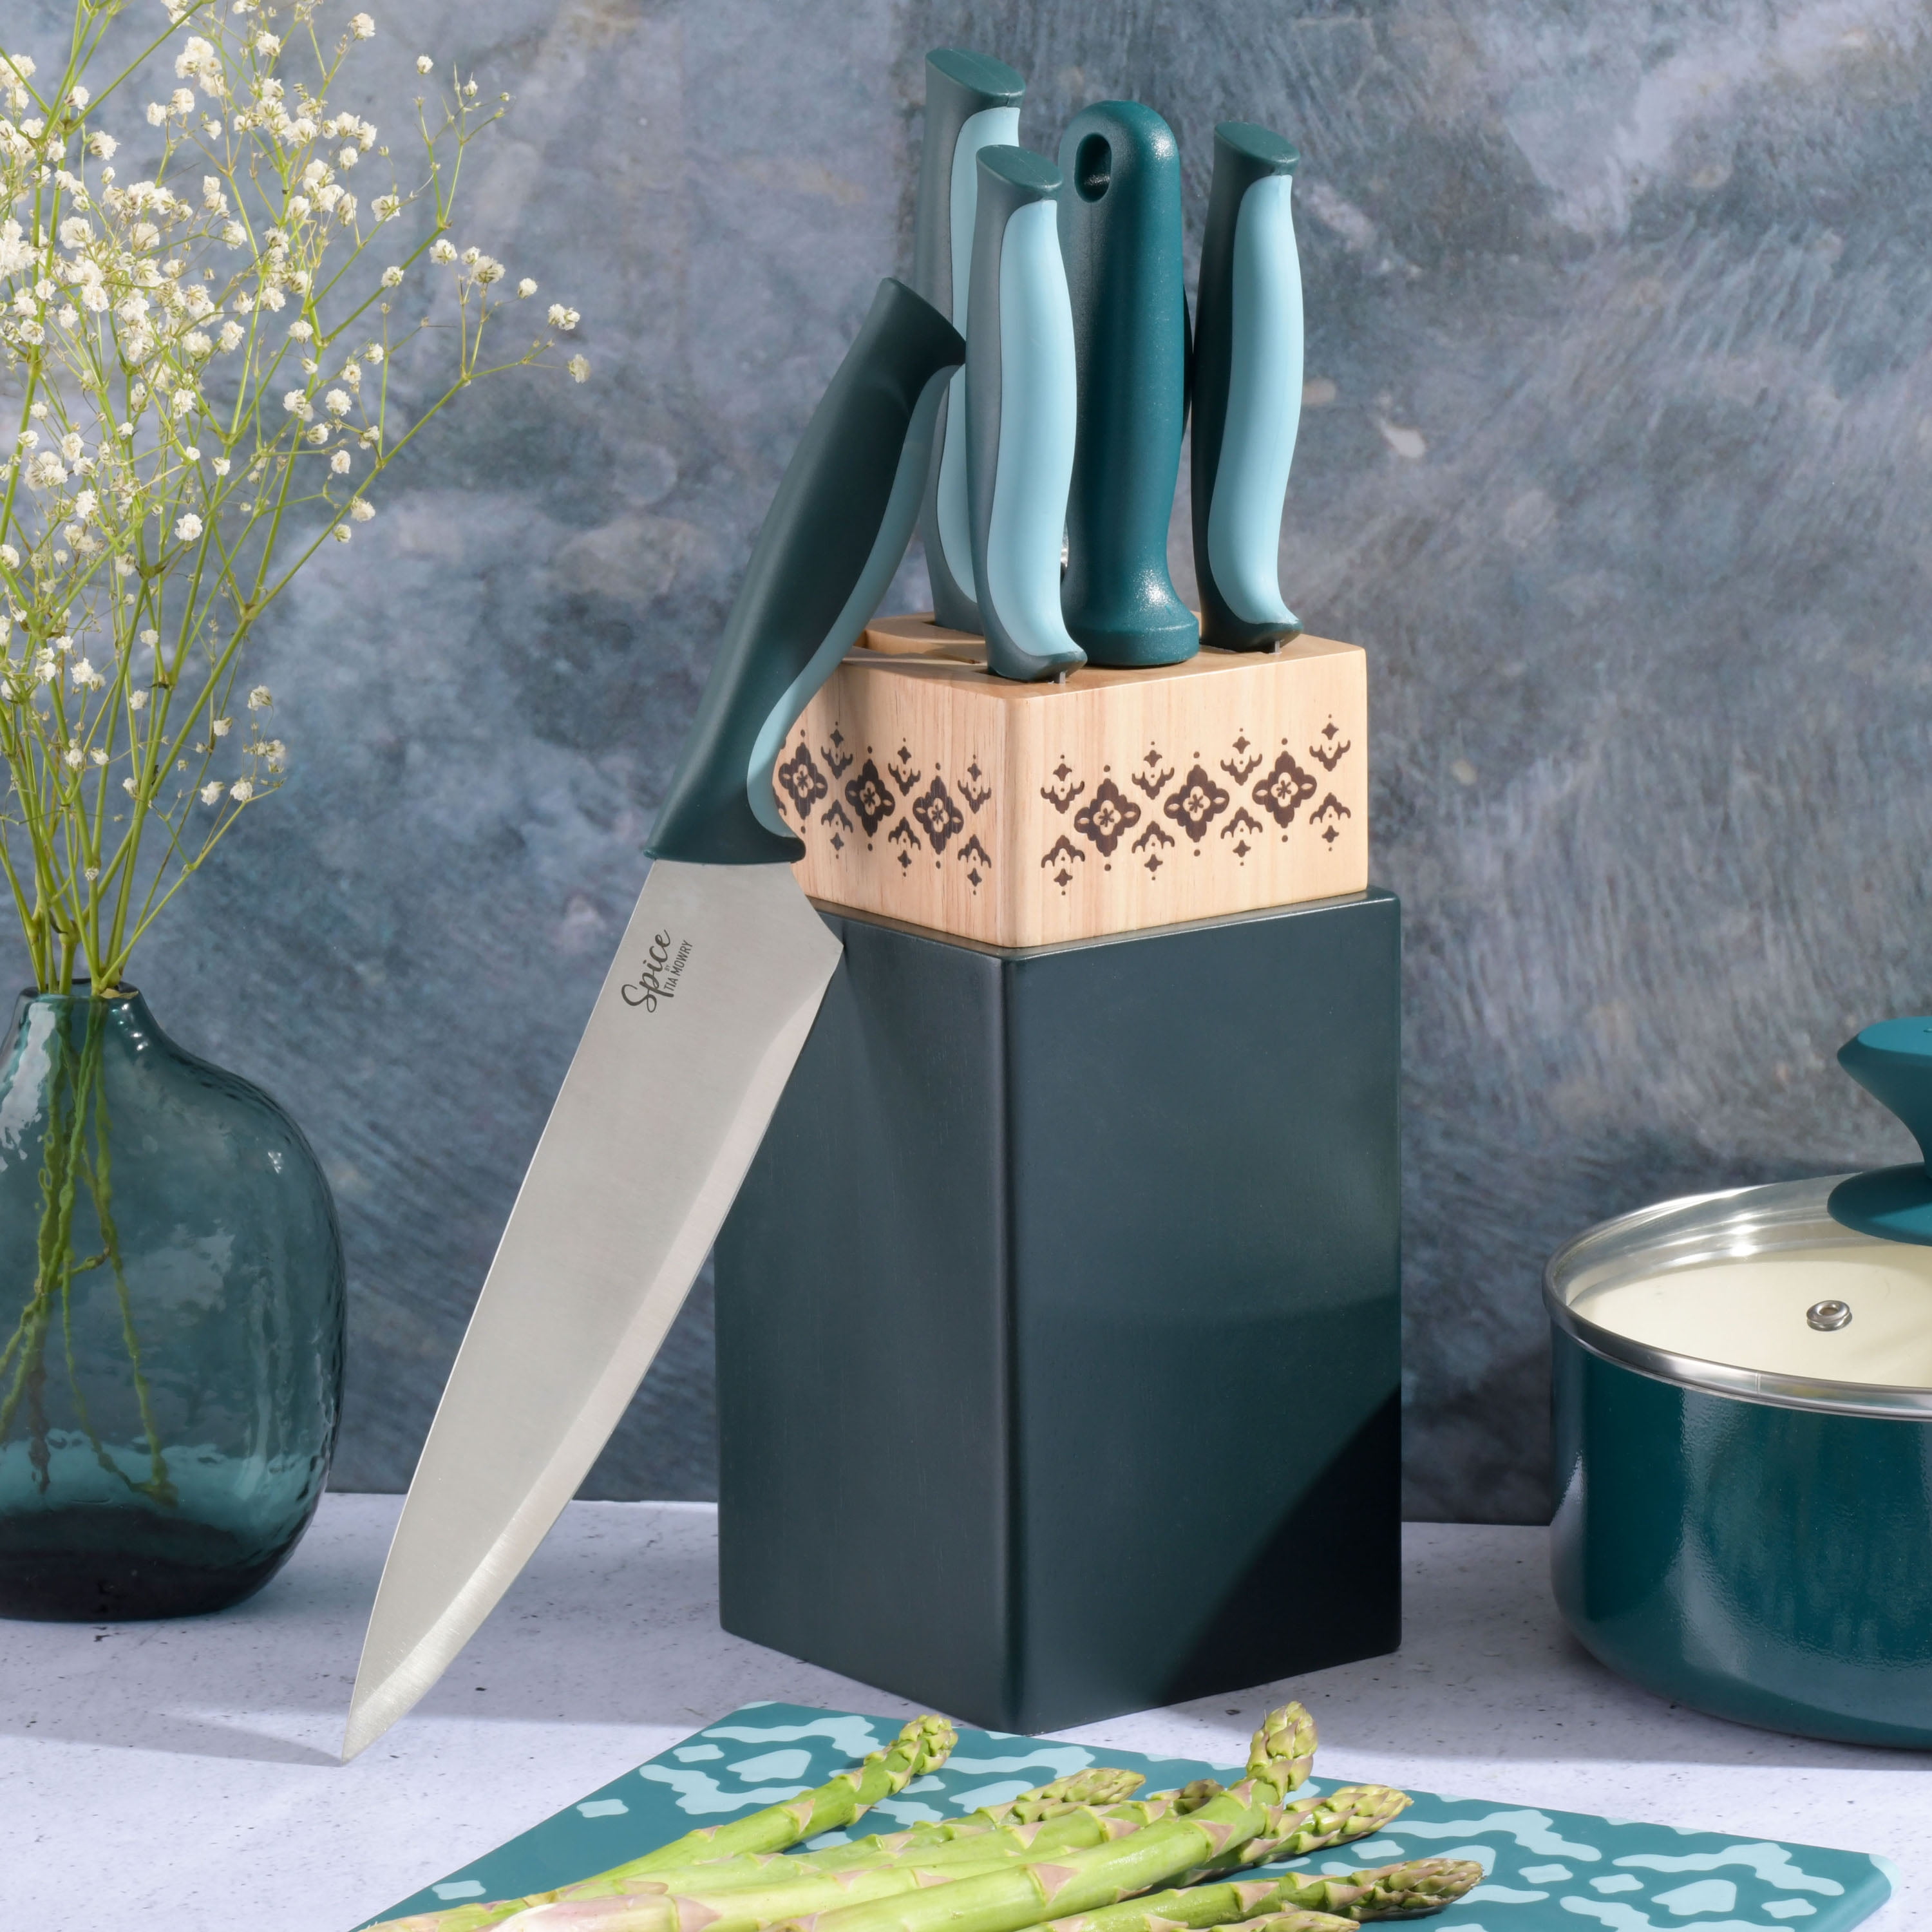 Spice by Tia Mowry Savory Saffron 10 Piece Knife and Cutting Board Cutlery  Set in Blue and Pink